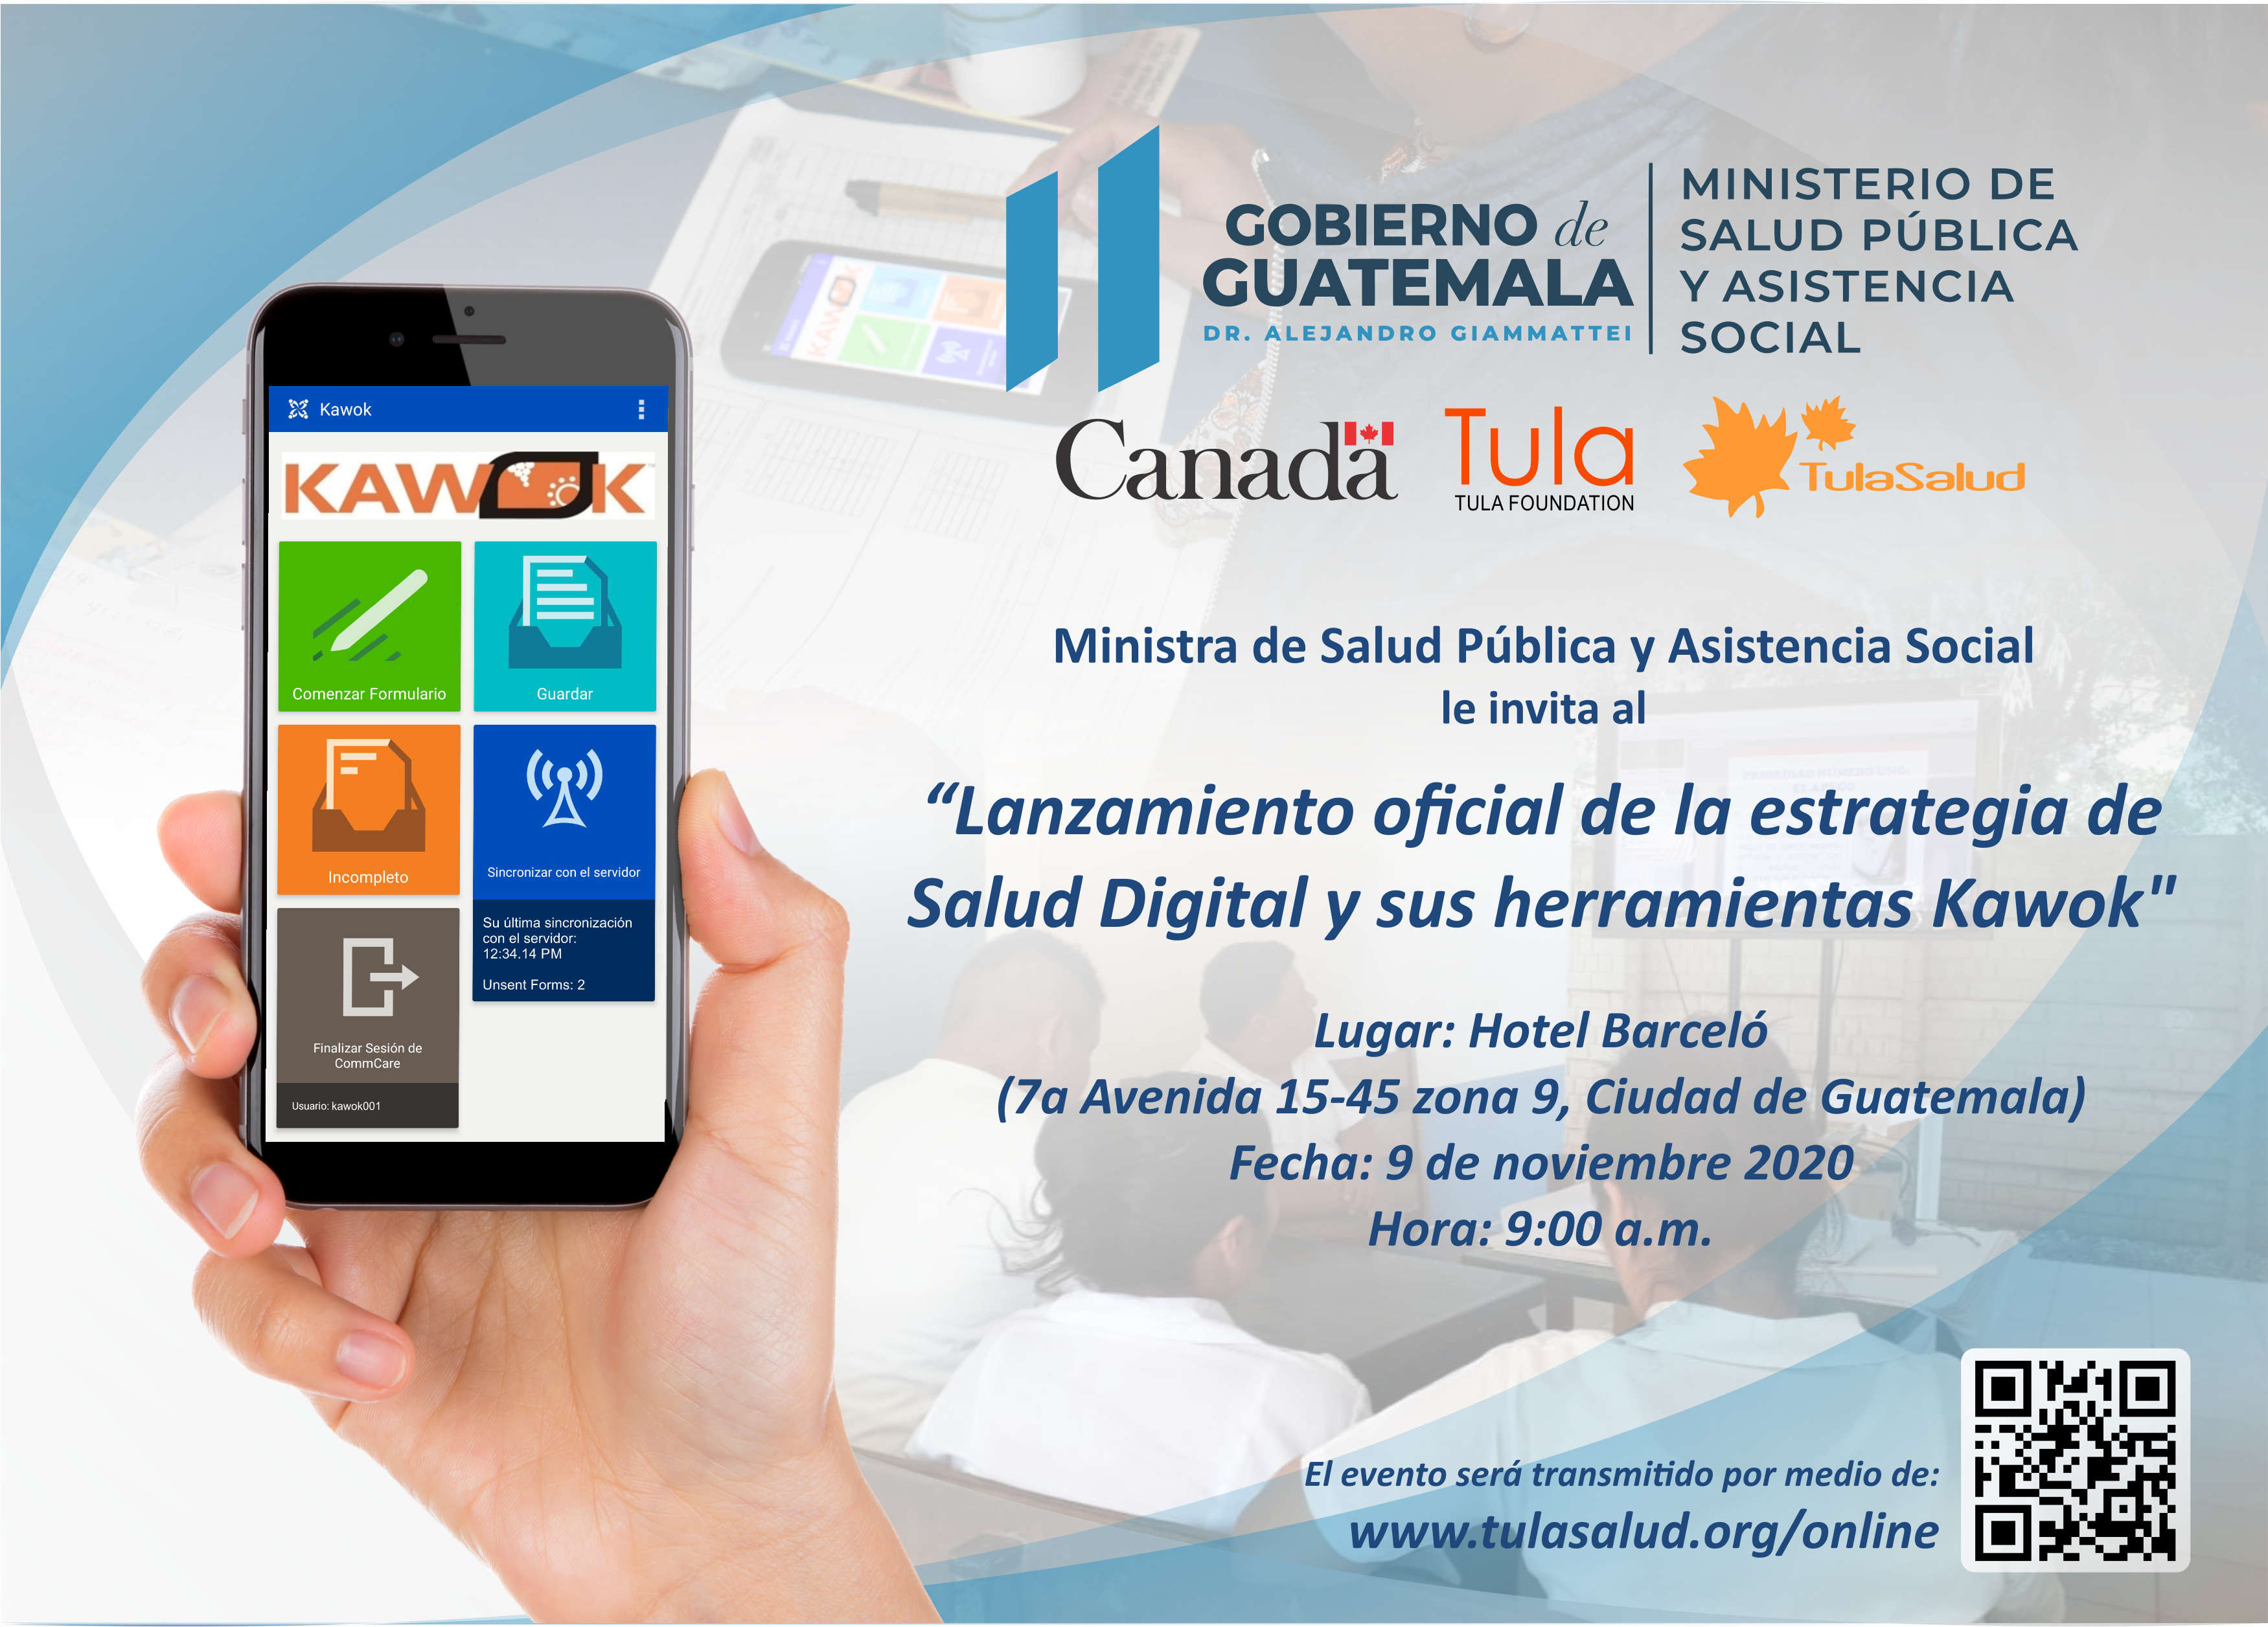 Invitation to the launch of the Ministry of Health's Digital Health Strategy with TulaSalud's Kawok tool.